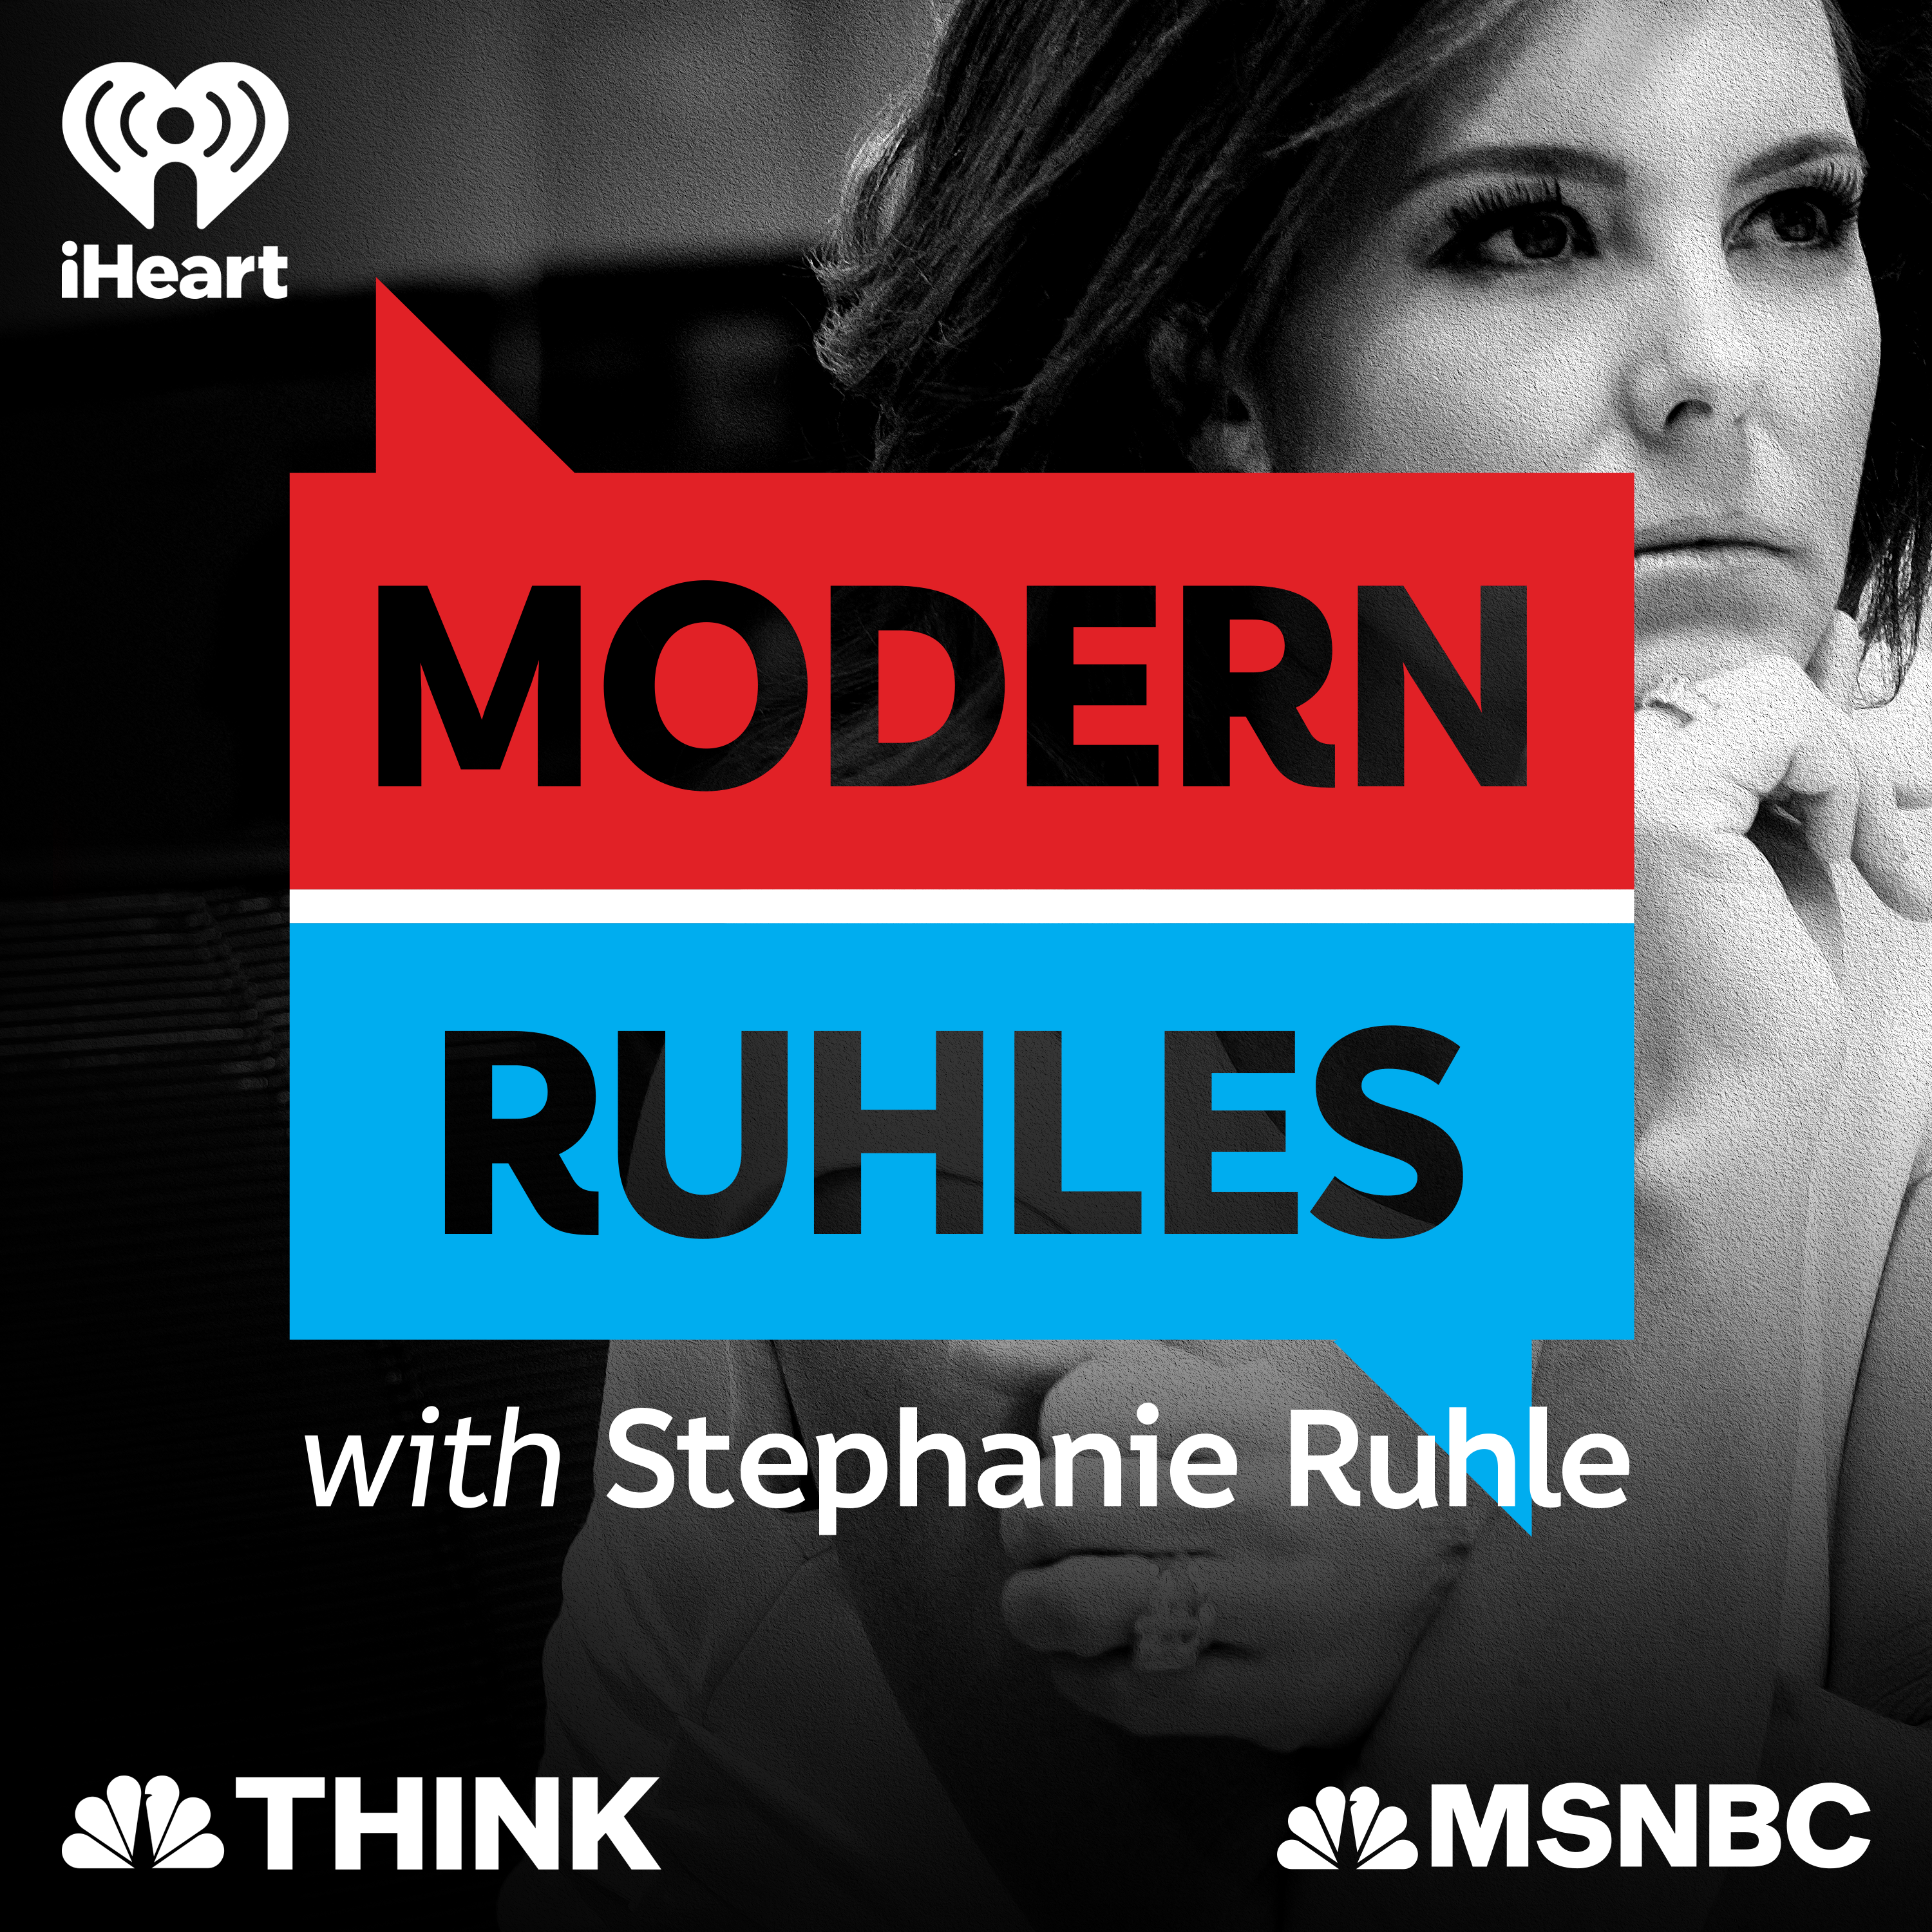 Introducing Modern Ruhles with Stephanie Ruhle.